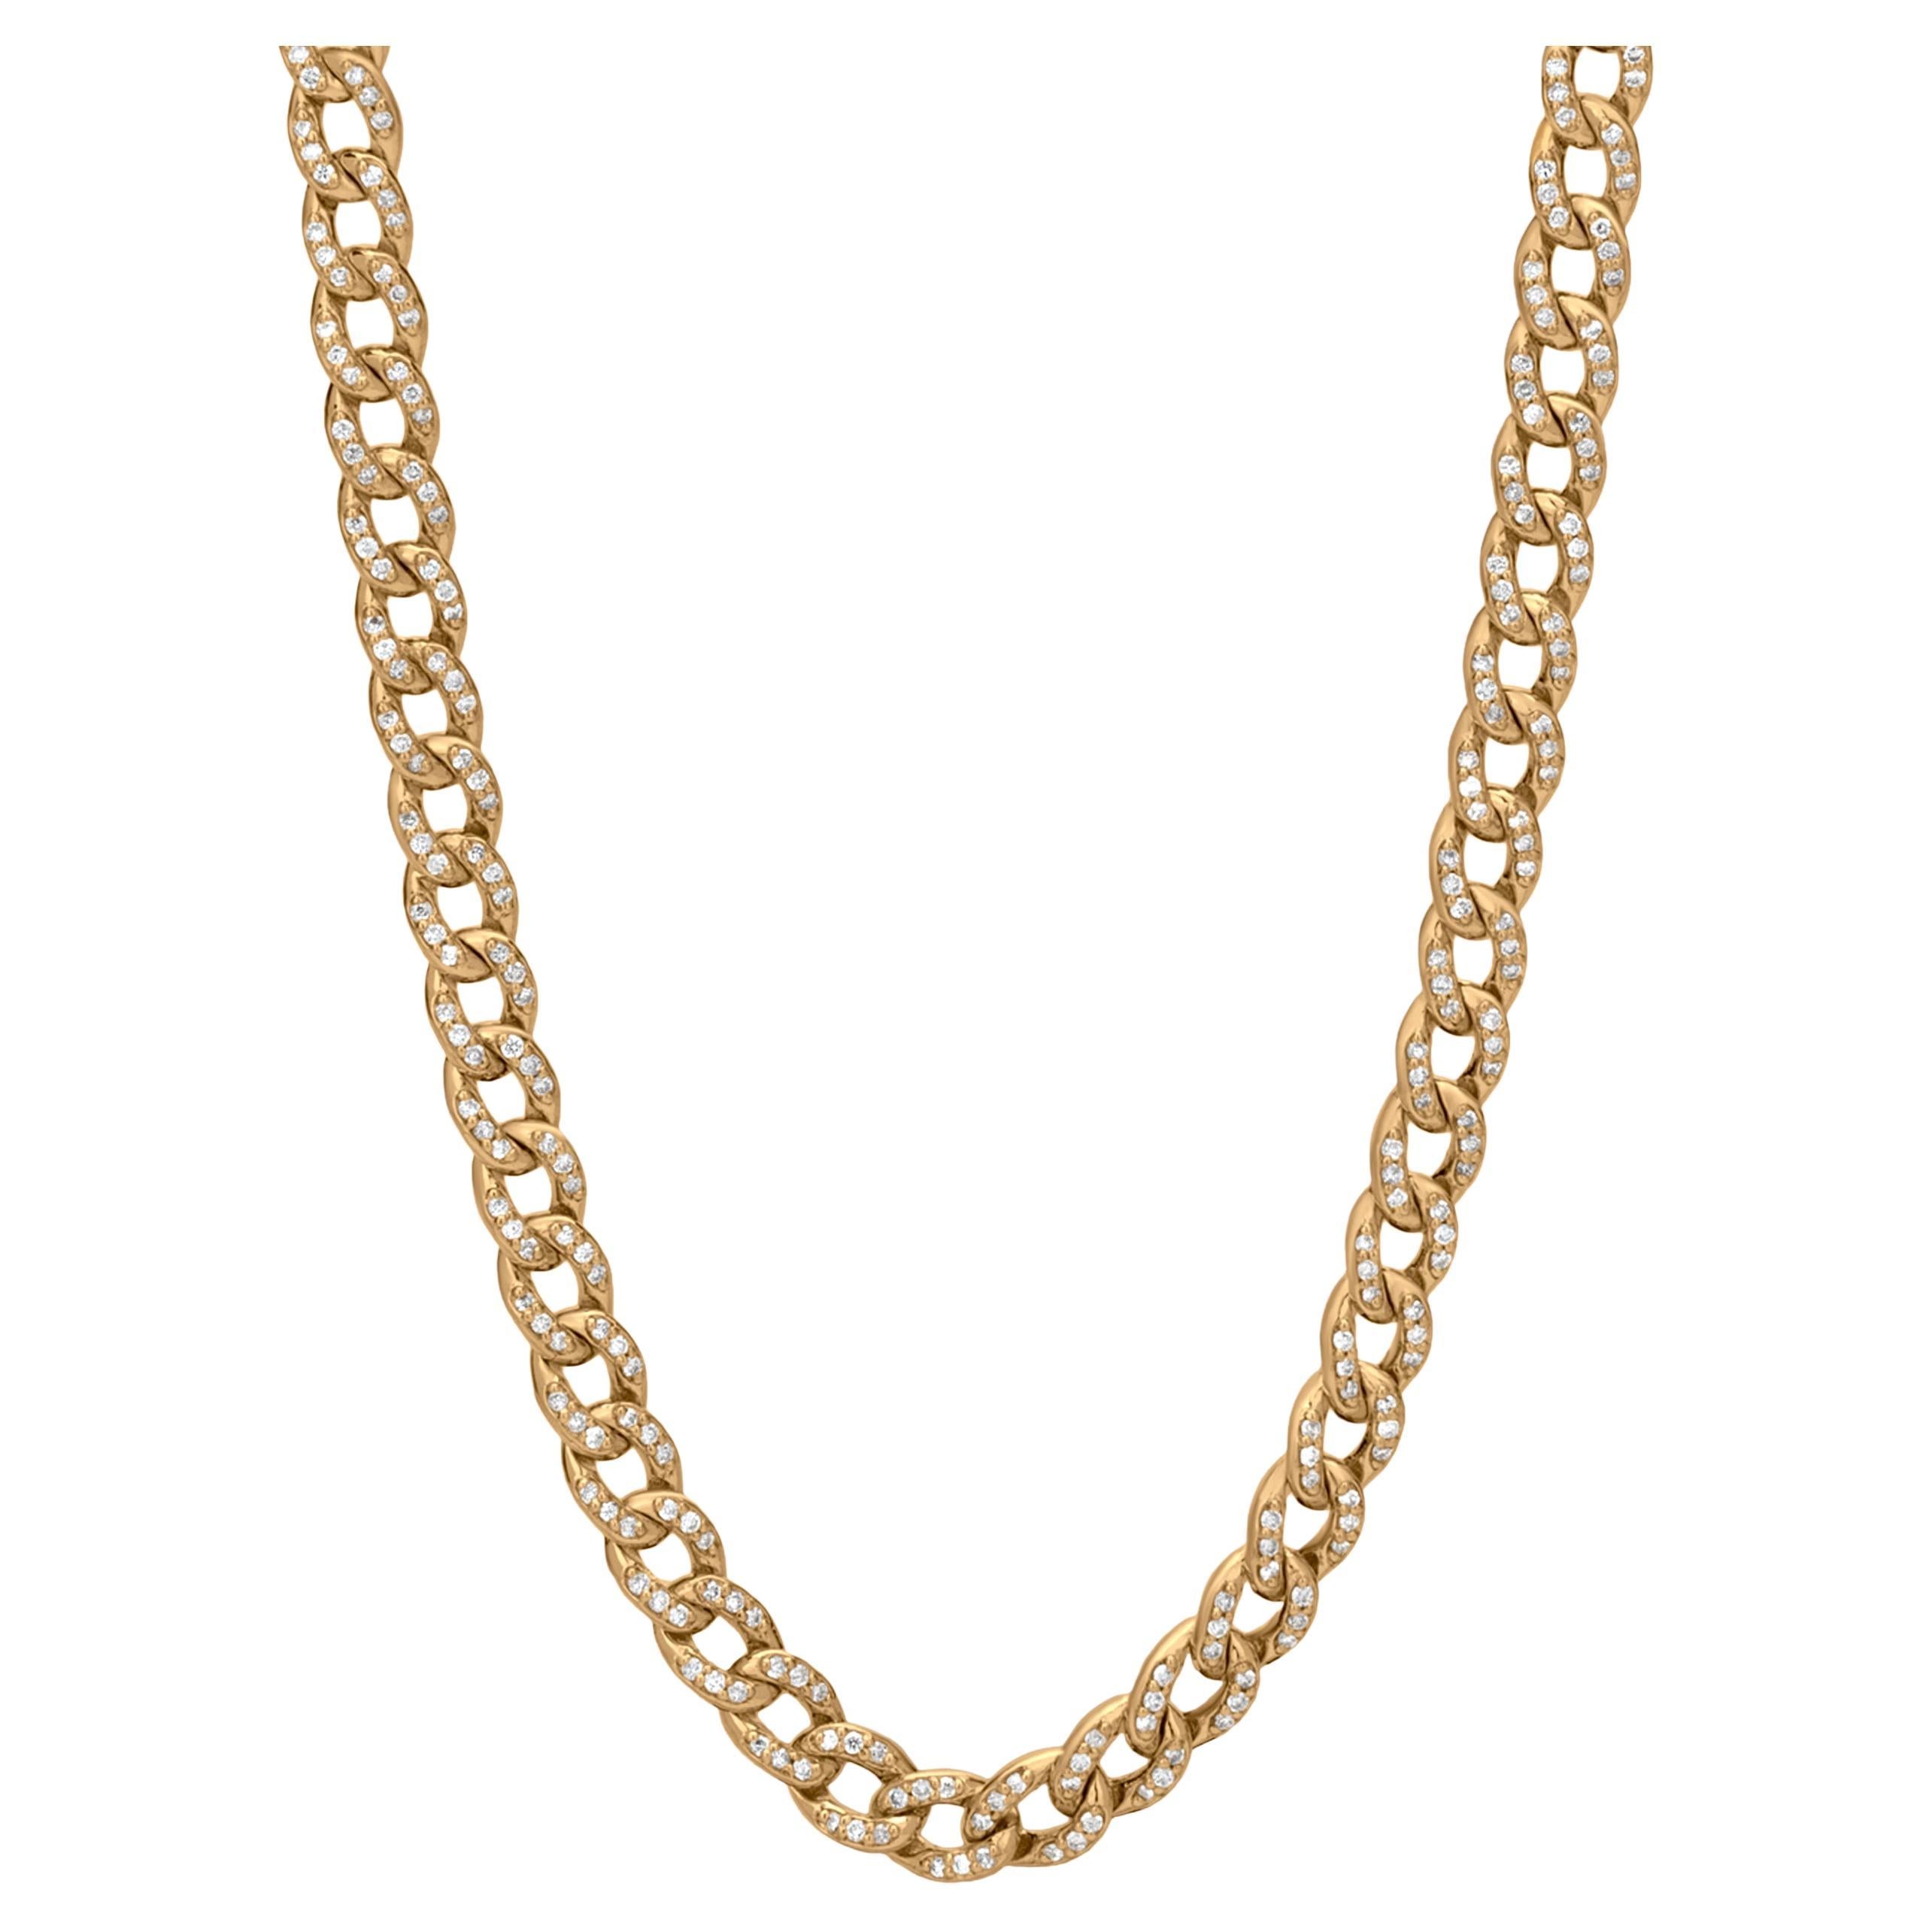 Nigaam 1.45 Carat T.W. White Diamond Curb Chain Link Necklace in 18k Yellow Gold